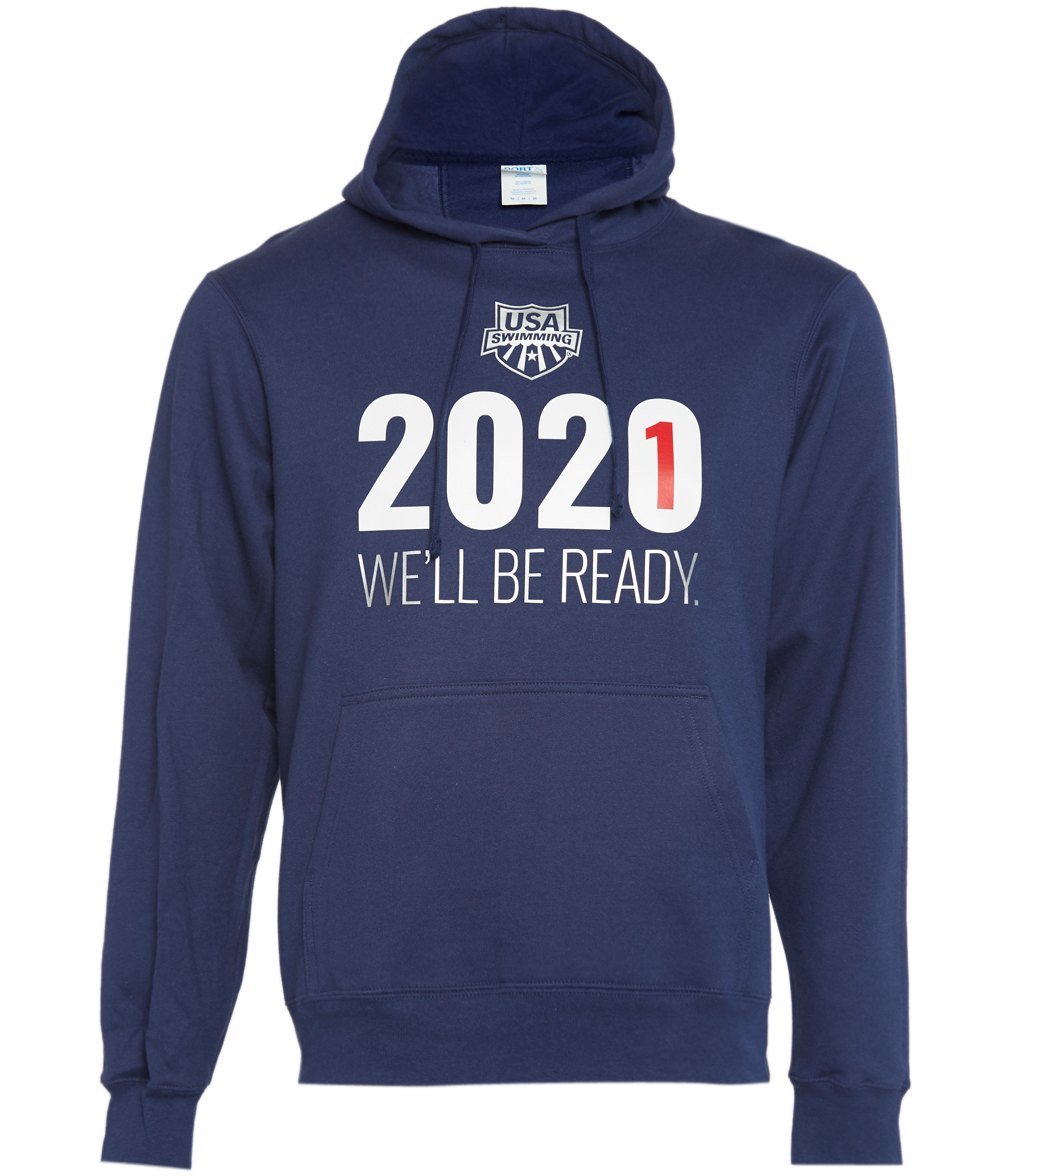 Usa Swimming Men's 2021 We Will Be Ready Hooded Sweatshirt - Navy Large Size Large Cotton/Polyester - Swimoutlet.com